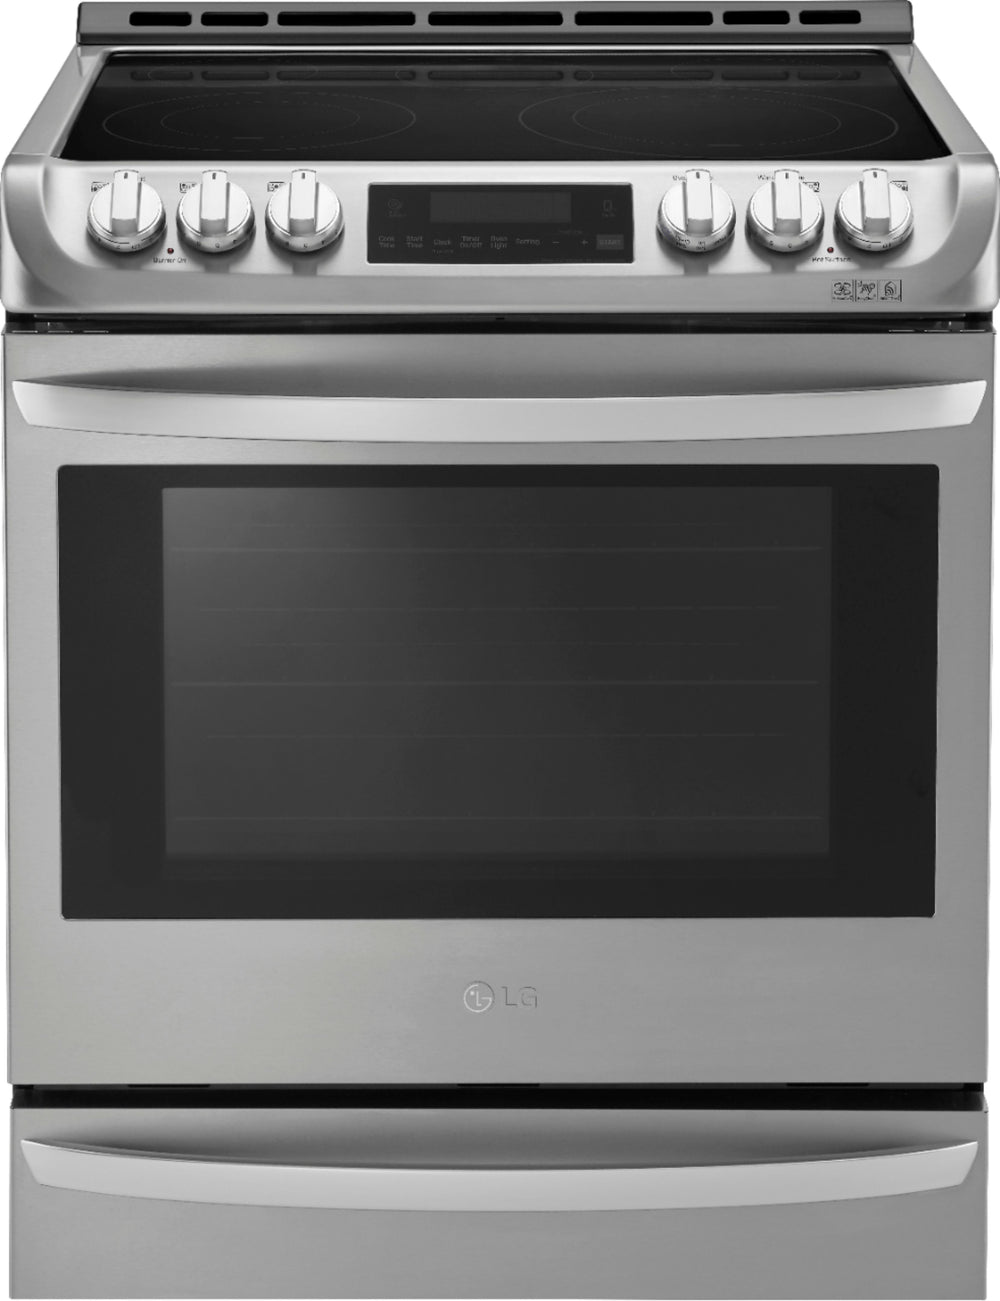 LG - 6.3 Cu. Ft. Self-Cleaning Slide-In Electric Range with ProBake Convection - Stainless steel_1